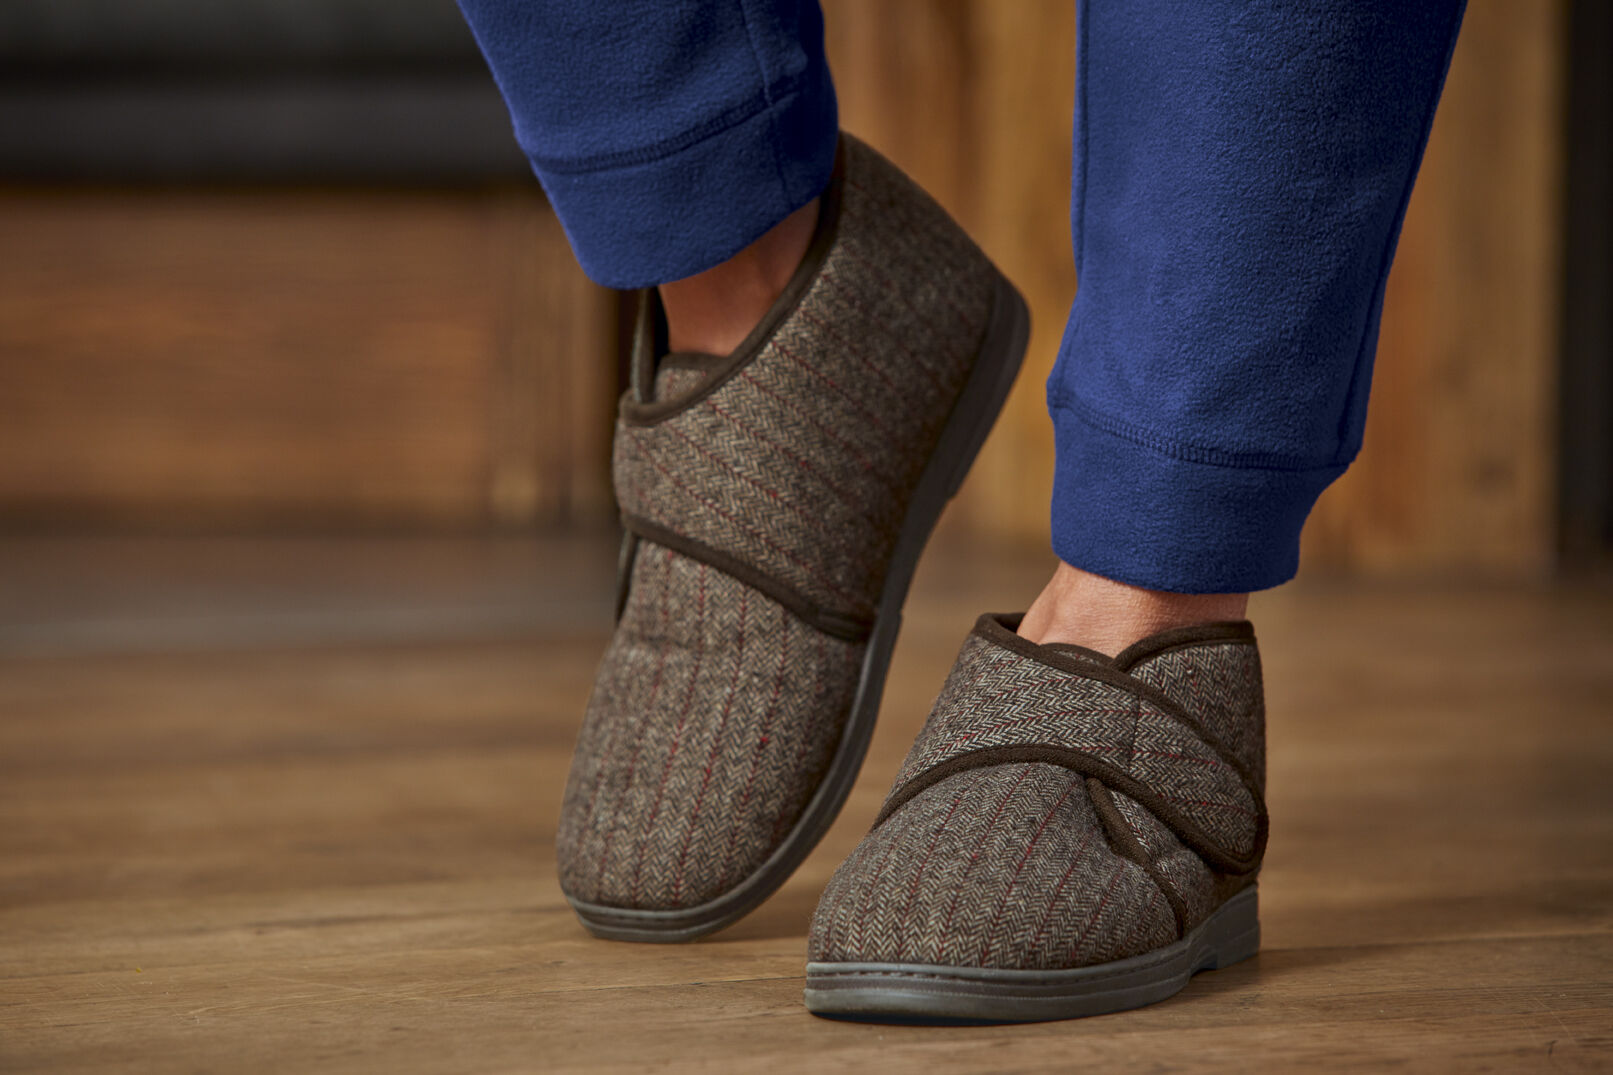 How to Choose the Best Men's and Women's Slippers